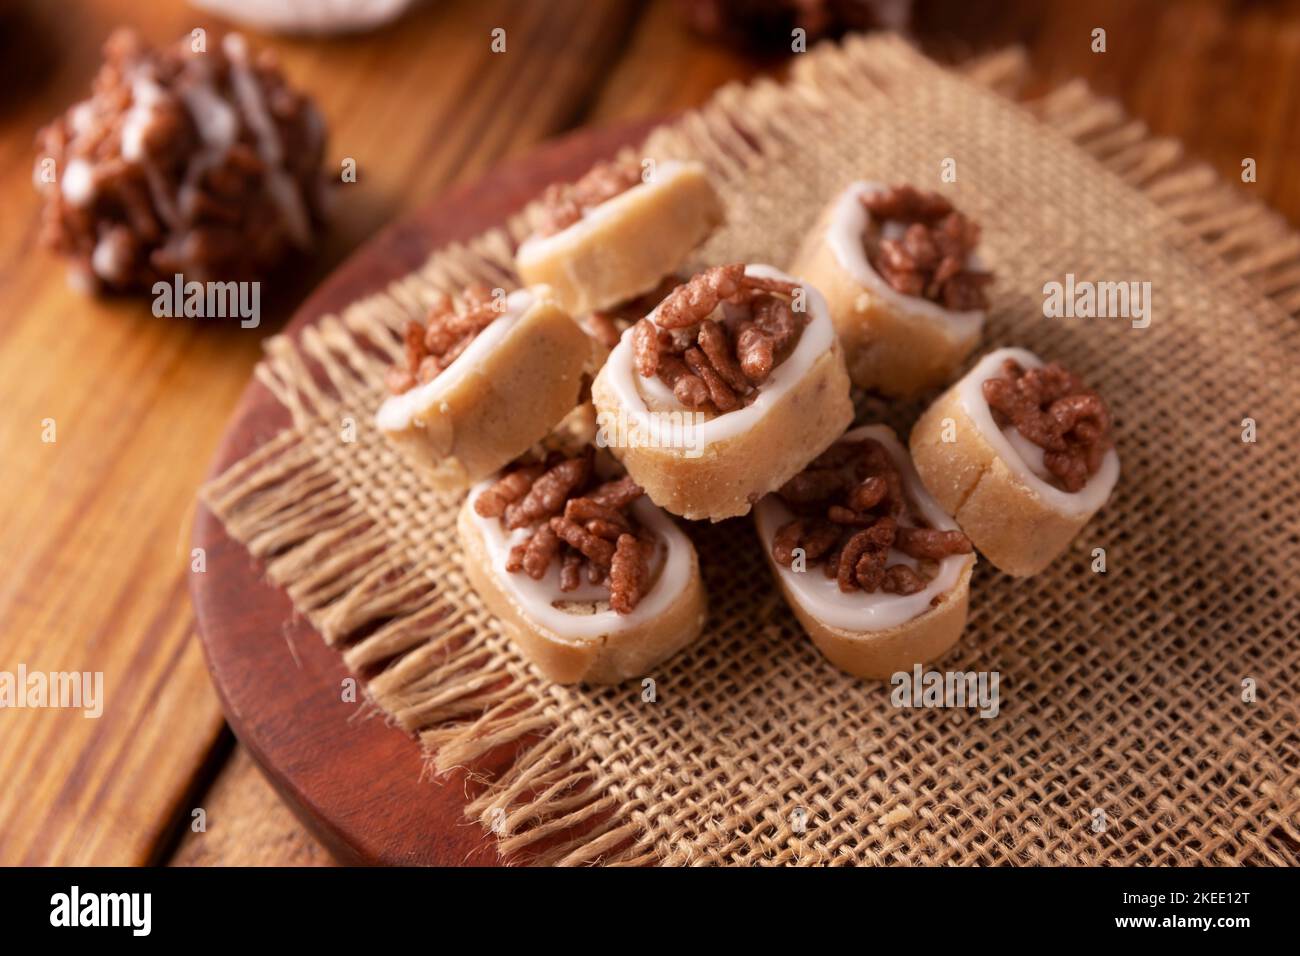 Homemade Mexican sweets, made from sweetened milk, traditionally handmade. Stock Photo